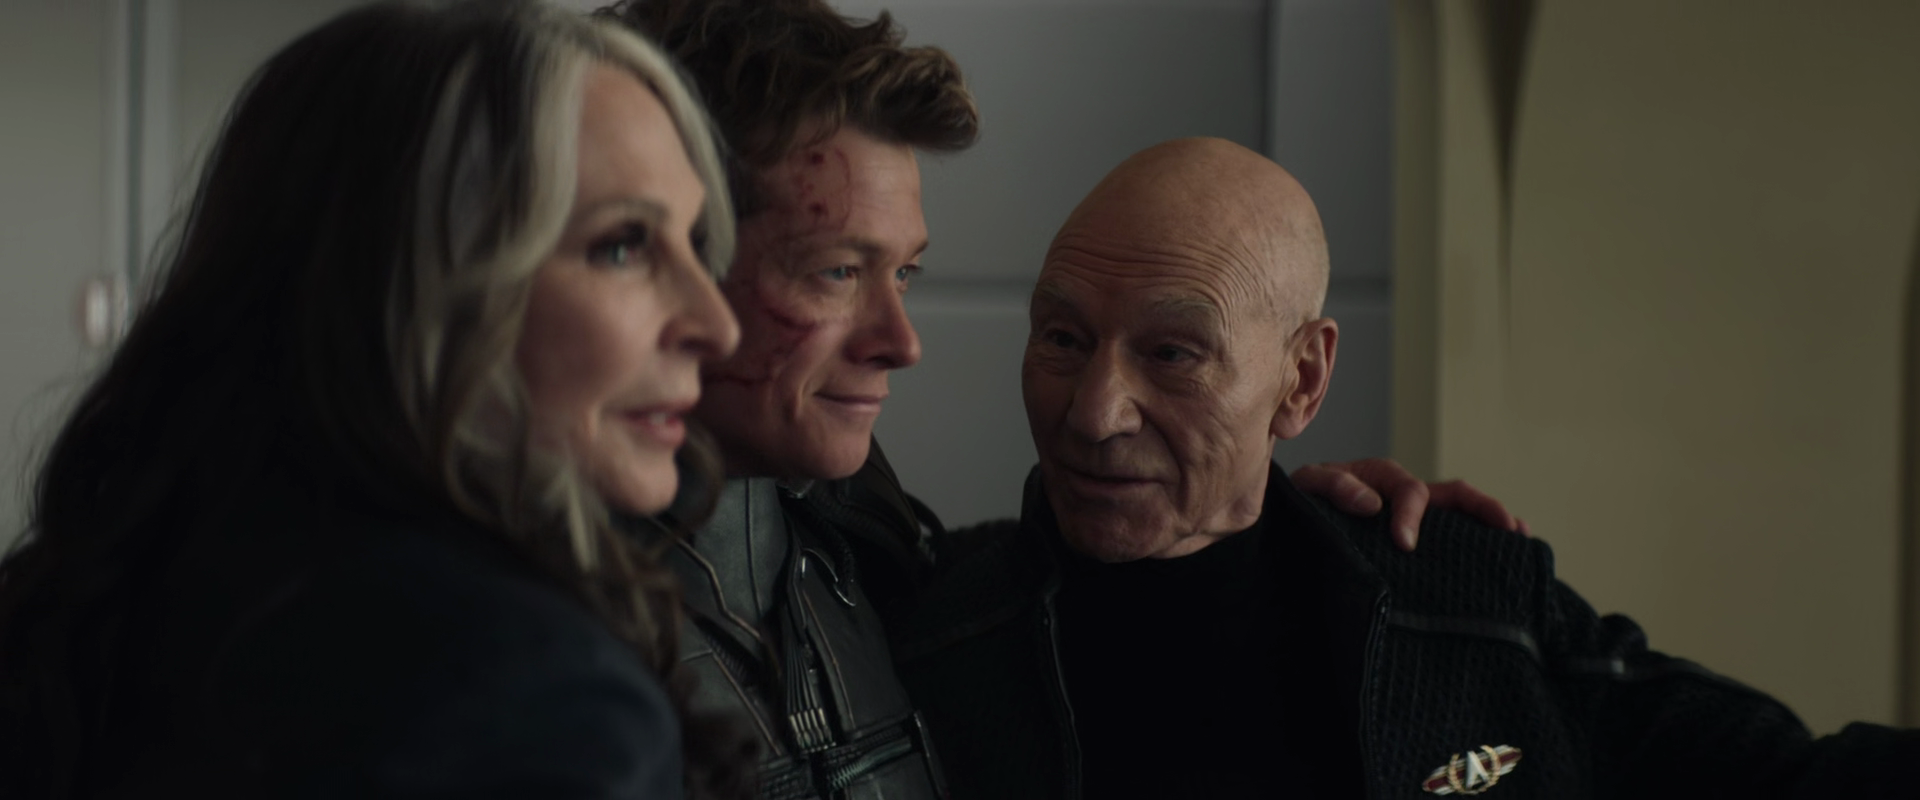 Picard (Patrick Stewart), Beverly (Gates McFadden) and Jack (Ed Speelers) stand united as a family for the first time in Star Trek: Picard Season 3 Episode 10 "Et in Arcadia Ego: Part 2" (2023), Paramount